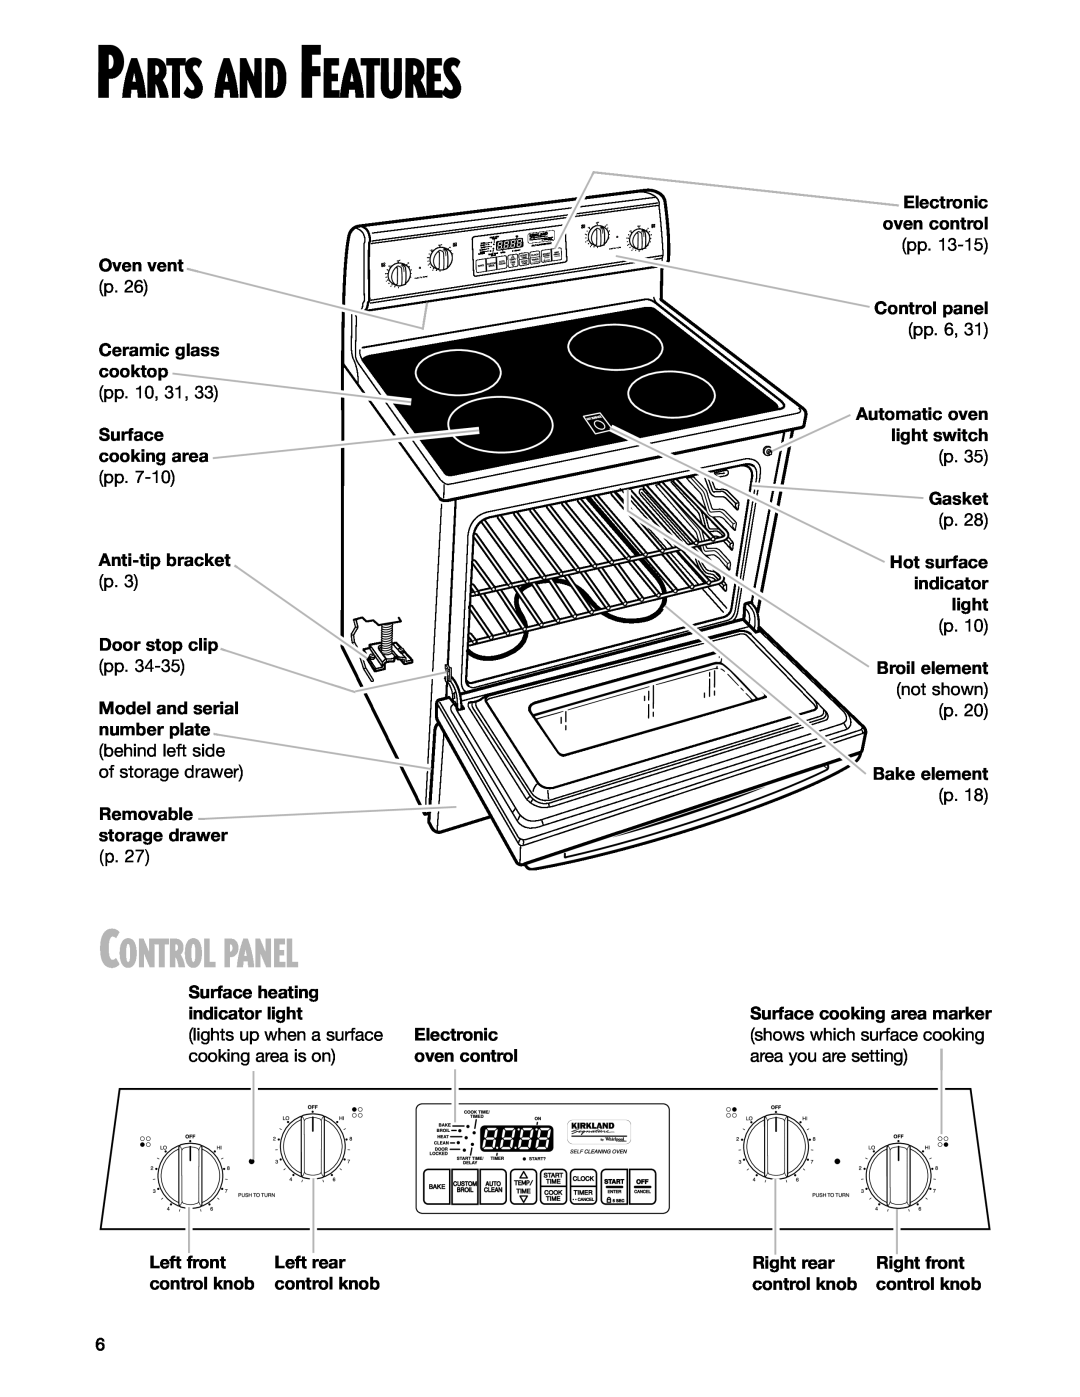 Whirlpool SES374H Parts And Features, Control Panel, Oven vent, Ceramic glass cooktop, Surface cooking area, Electronic 